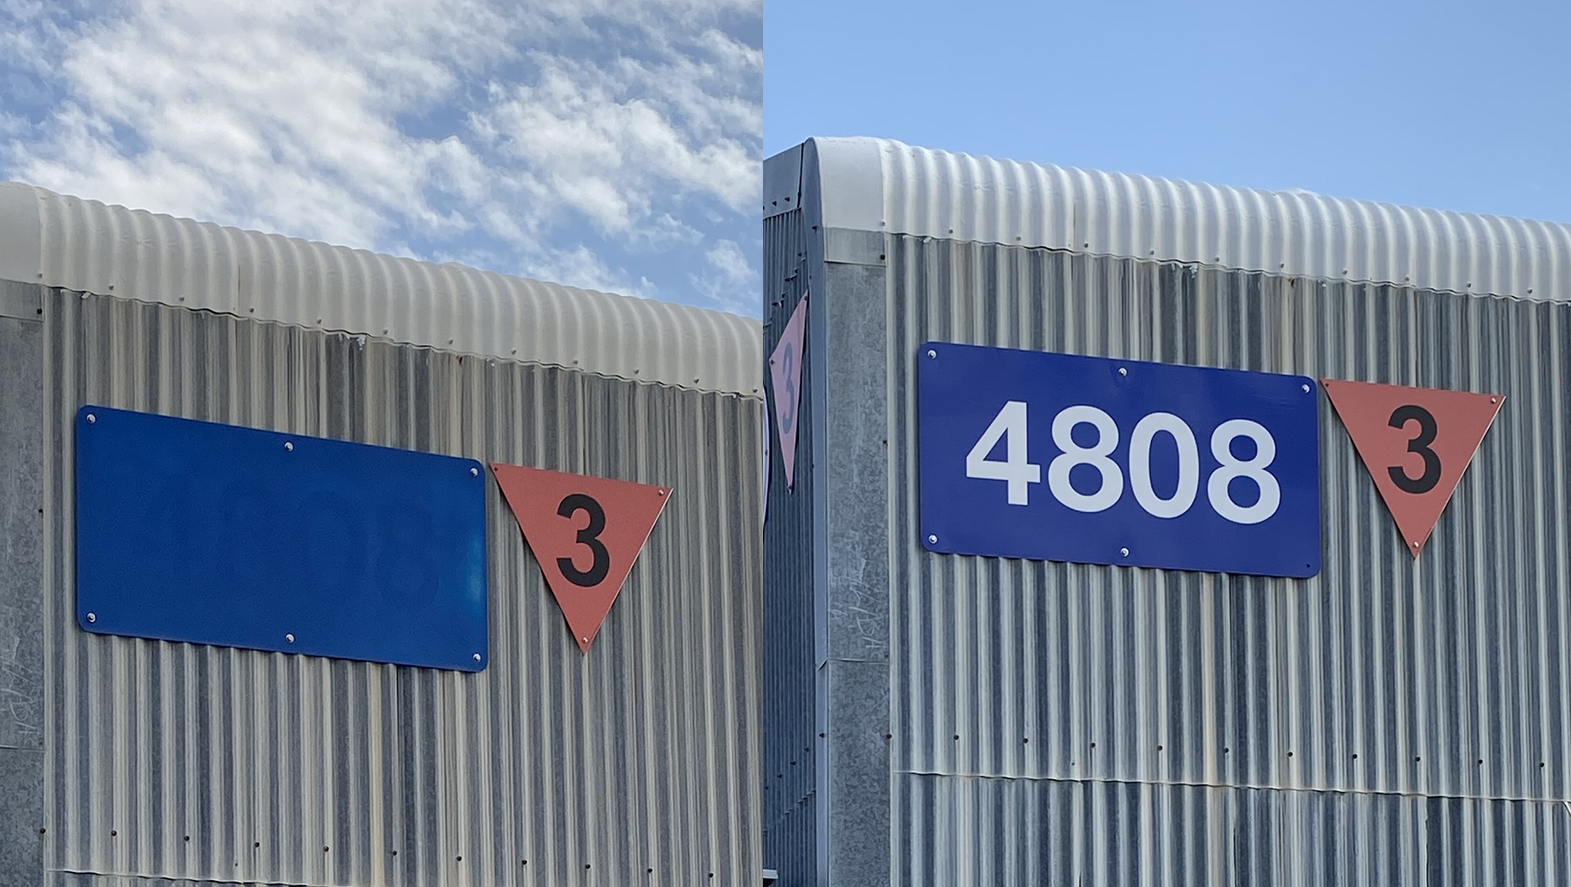 Before and after images of faded and new signs on the side of buildings.